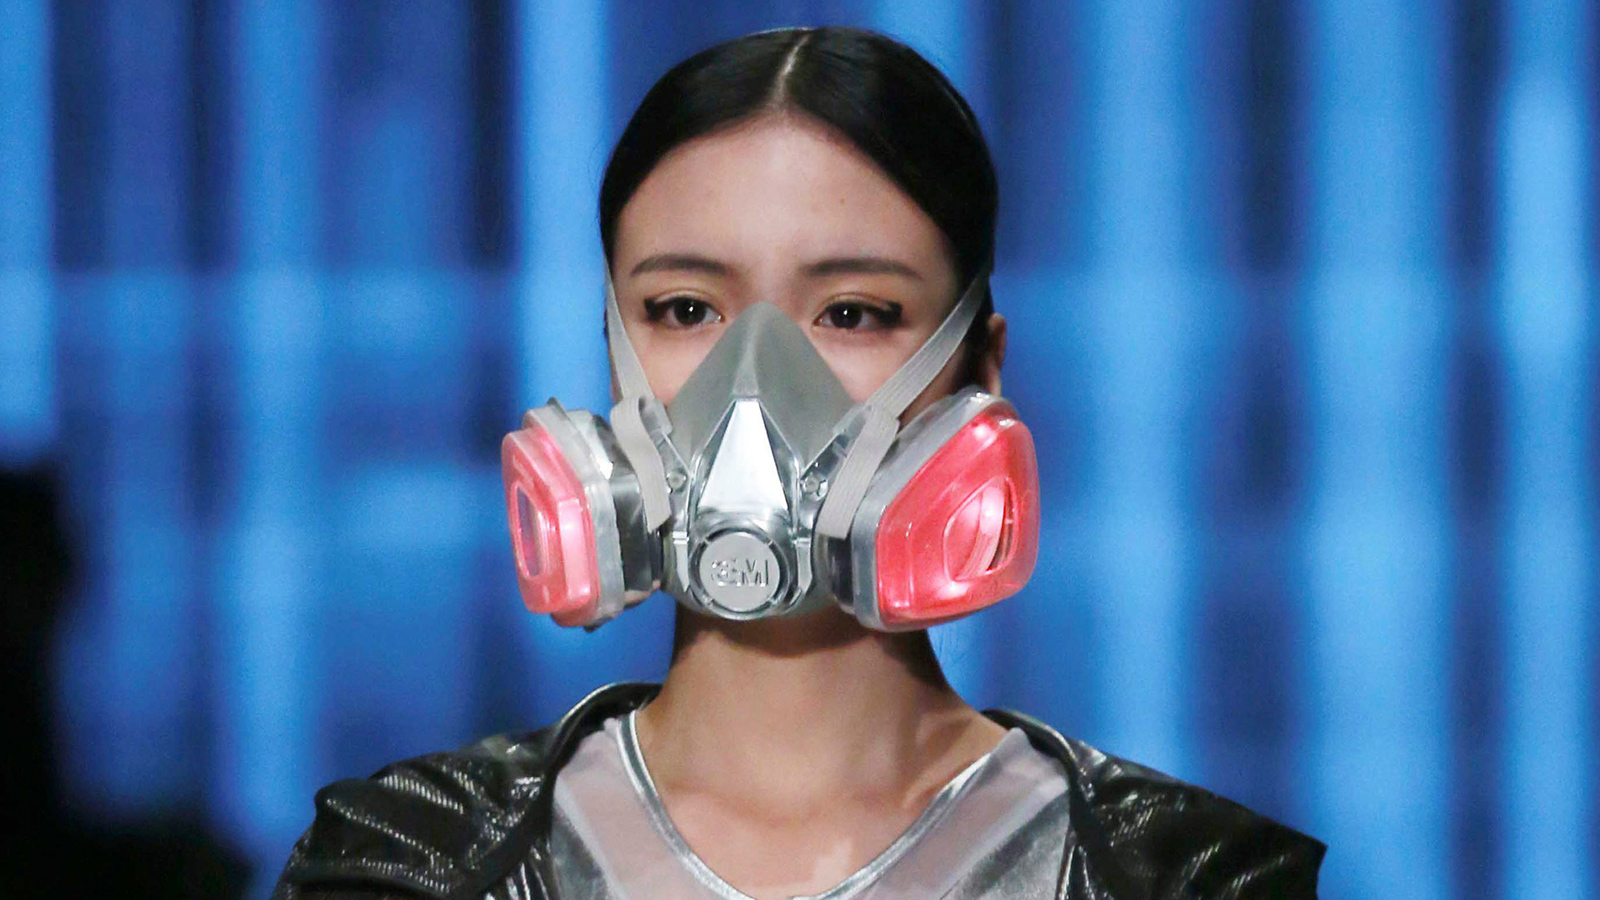 A model wearing a mask presents a creation at the QIAODAN Yin Peng Sports Wear Collection show during China Fashion Week in Beijing, October 28, 2014.